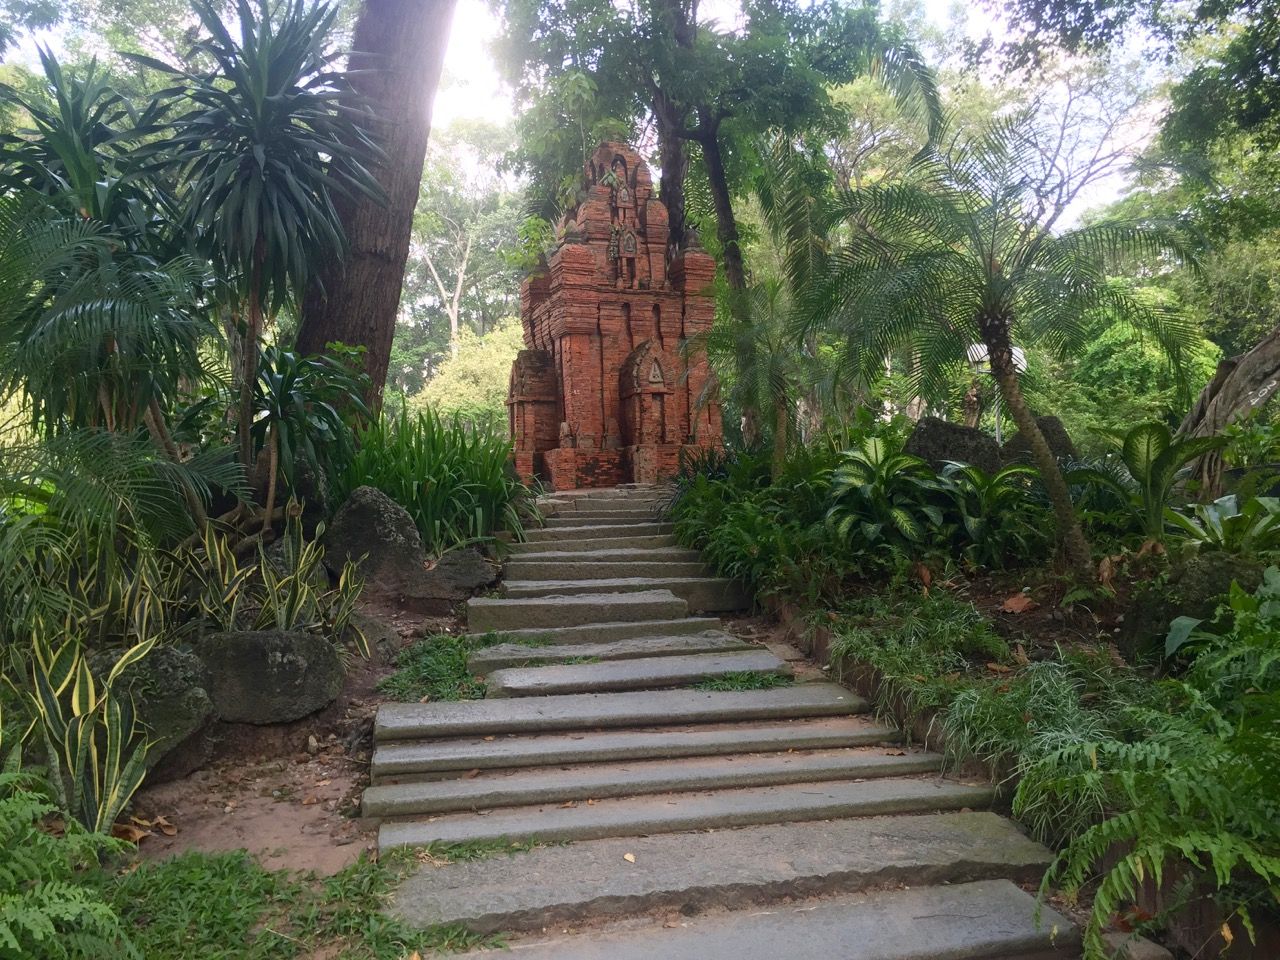 A stone temple in a park.